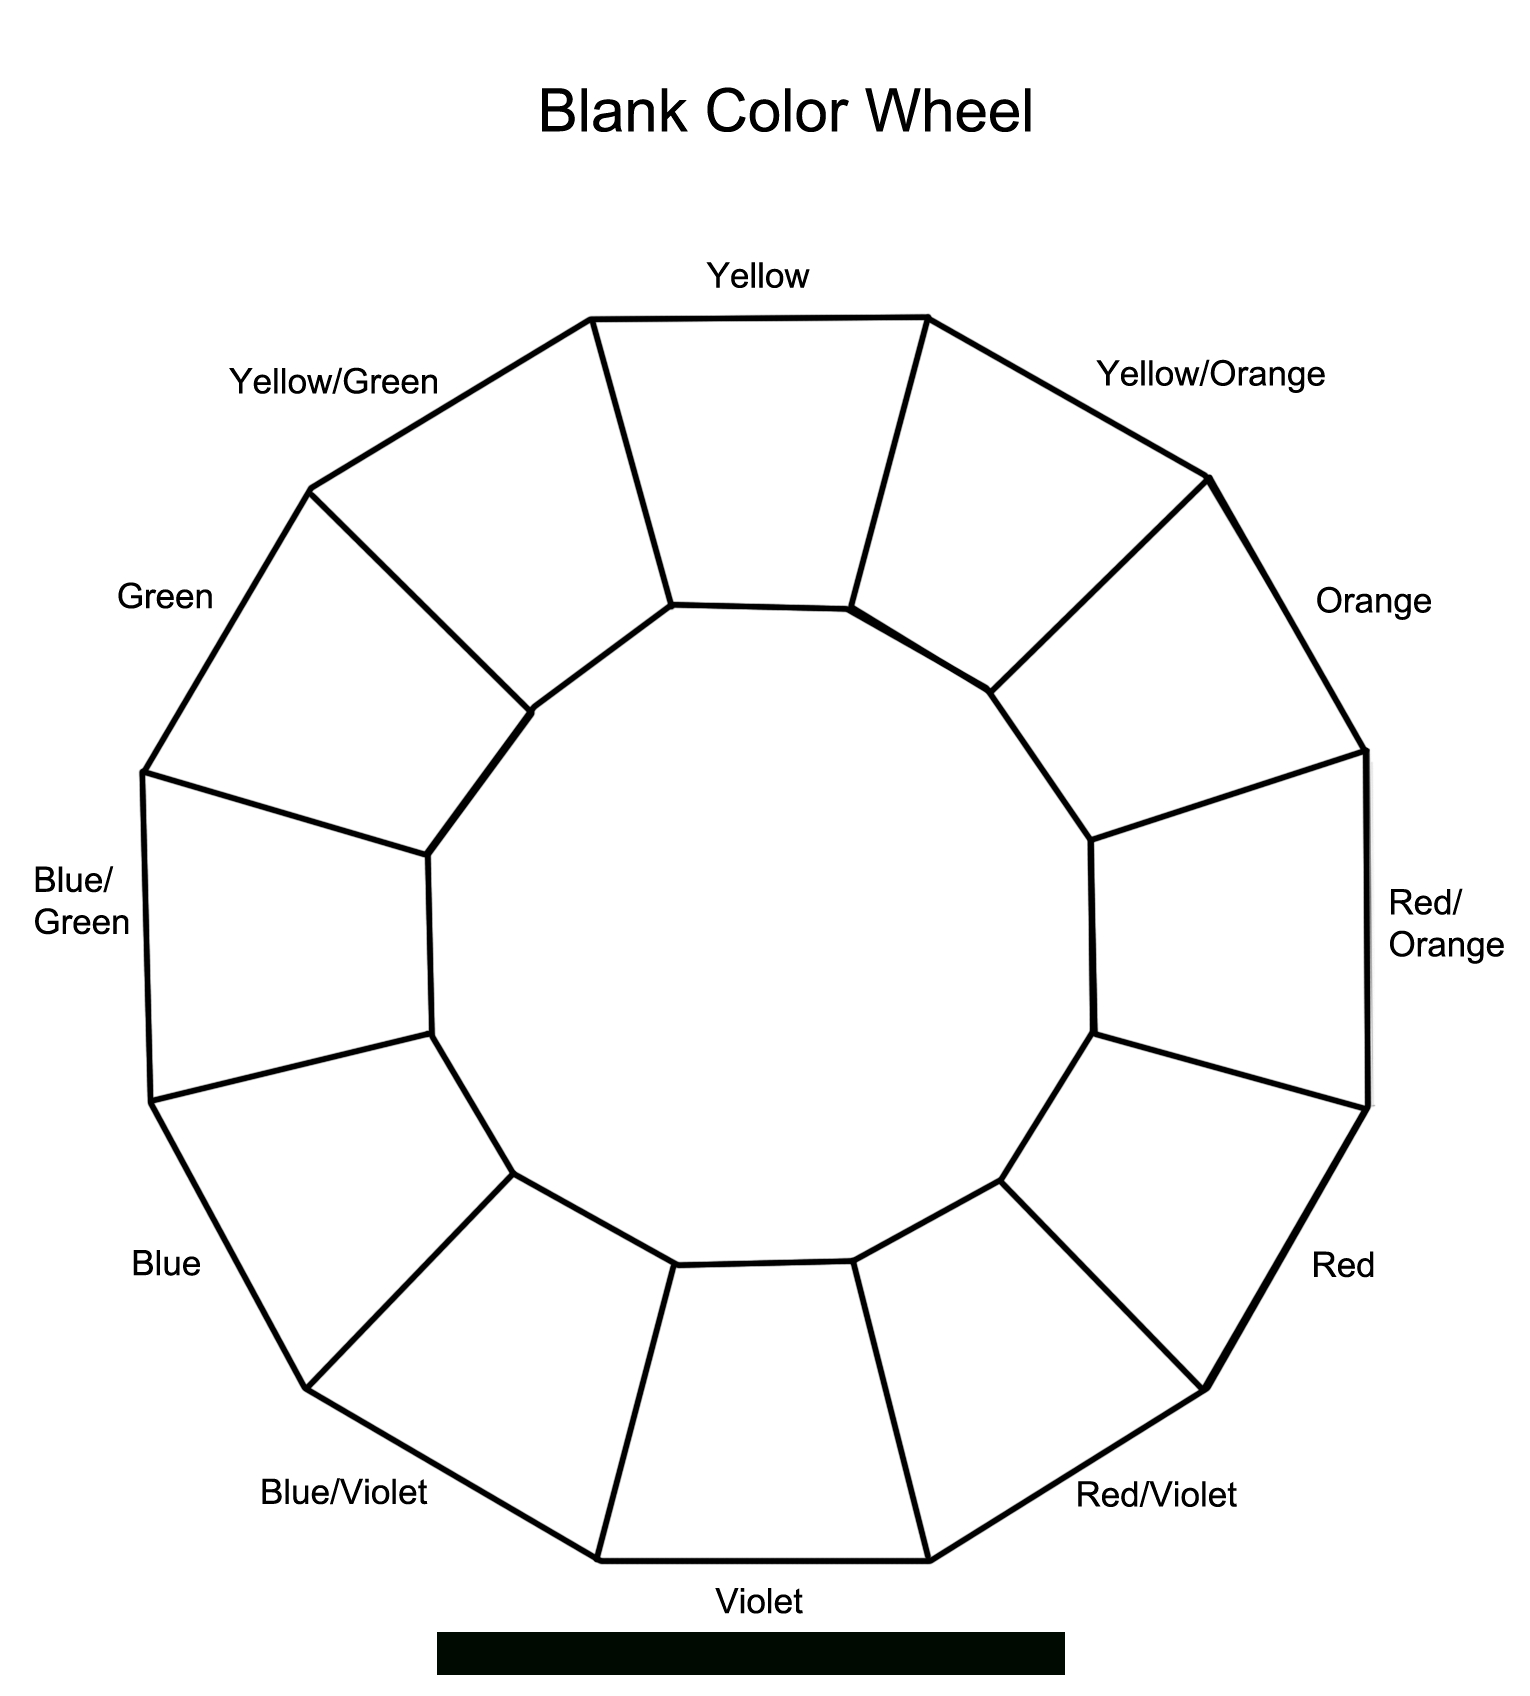 12 Section Colour Wheel | Free Pictures In 2019 | Color In Blank Color Wheel Template